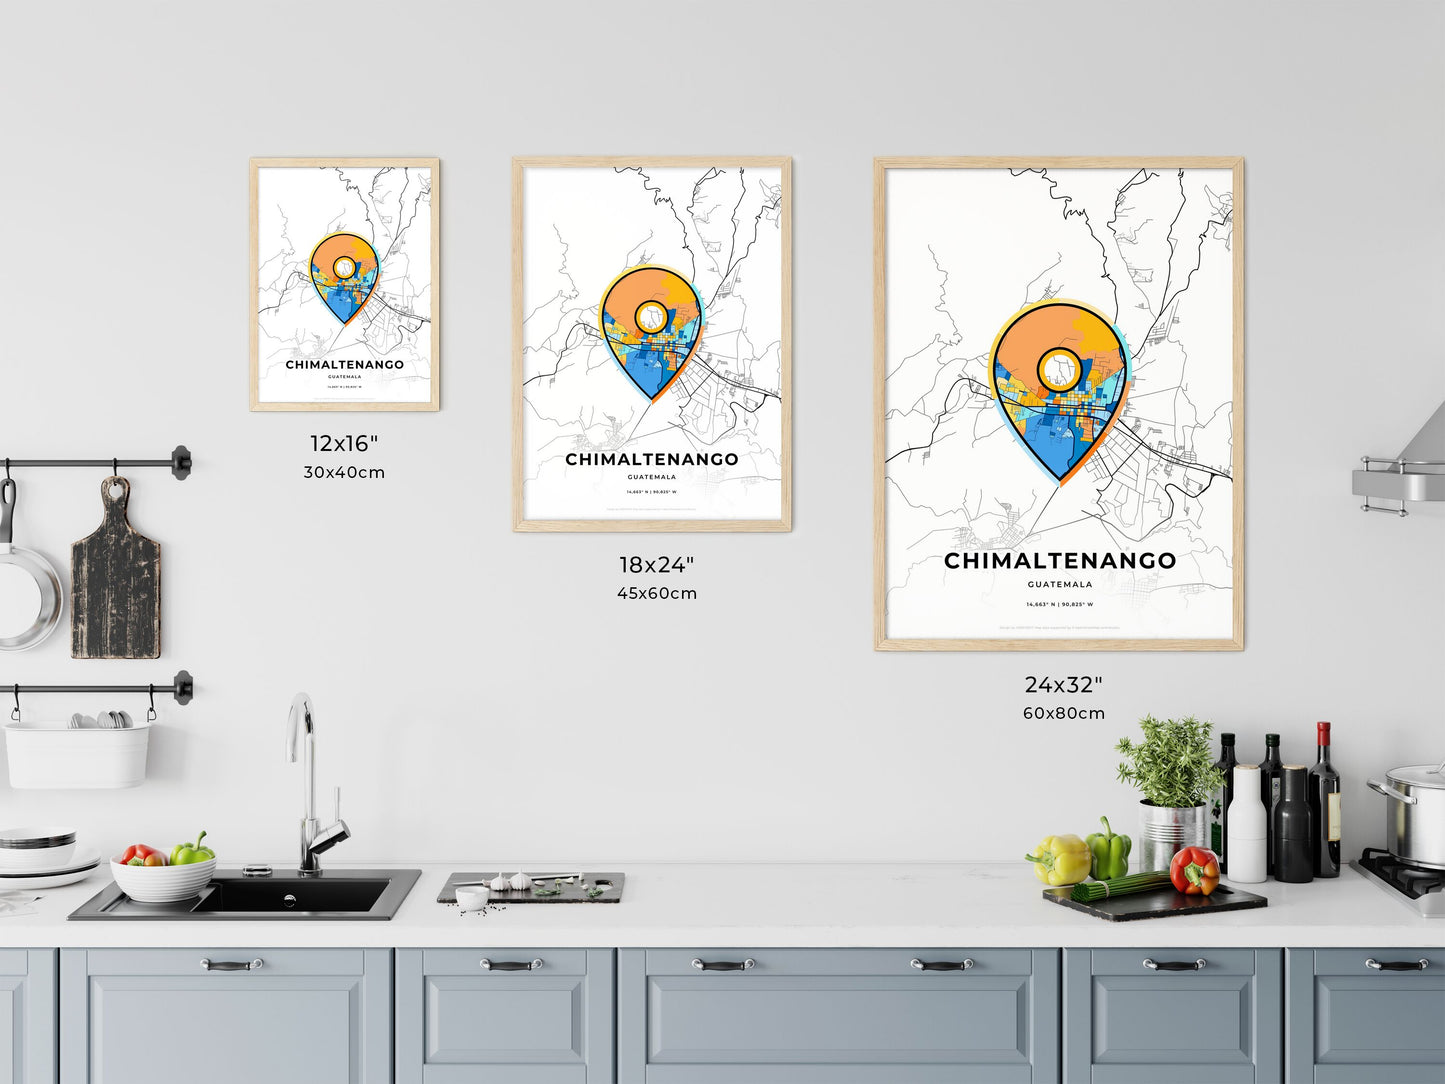 CHIMALTENANGO GUATEMALA minimal art map with a colorful icon. Where it all began, Couple map gift.